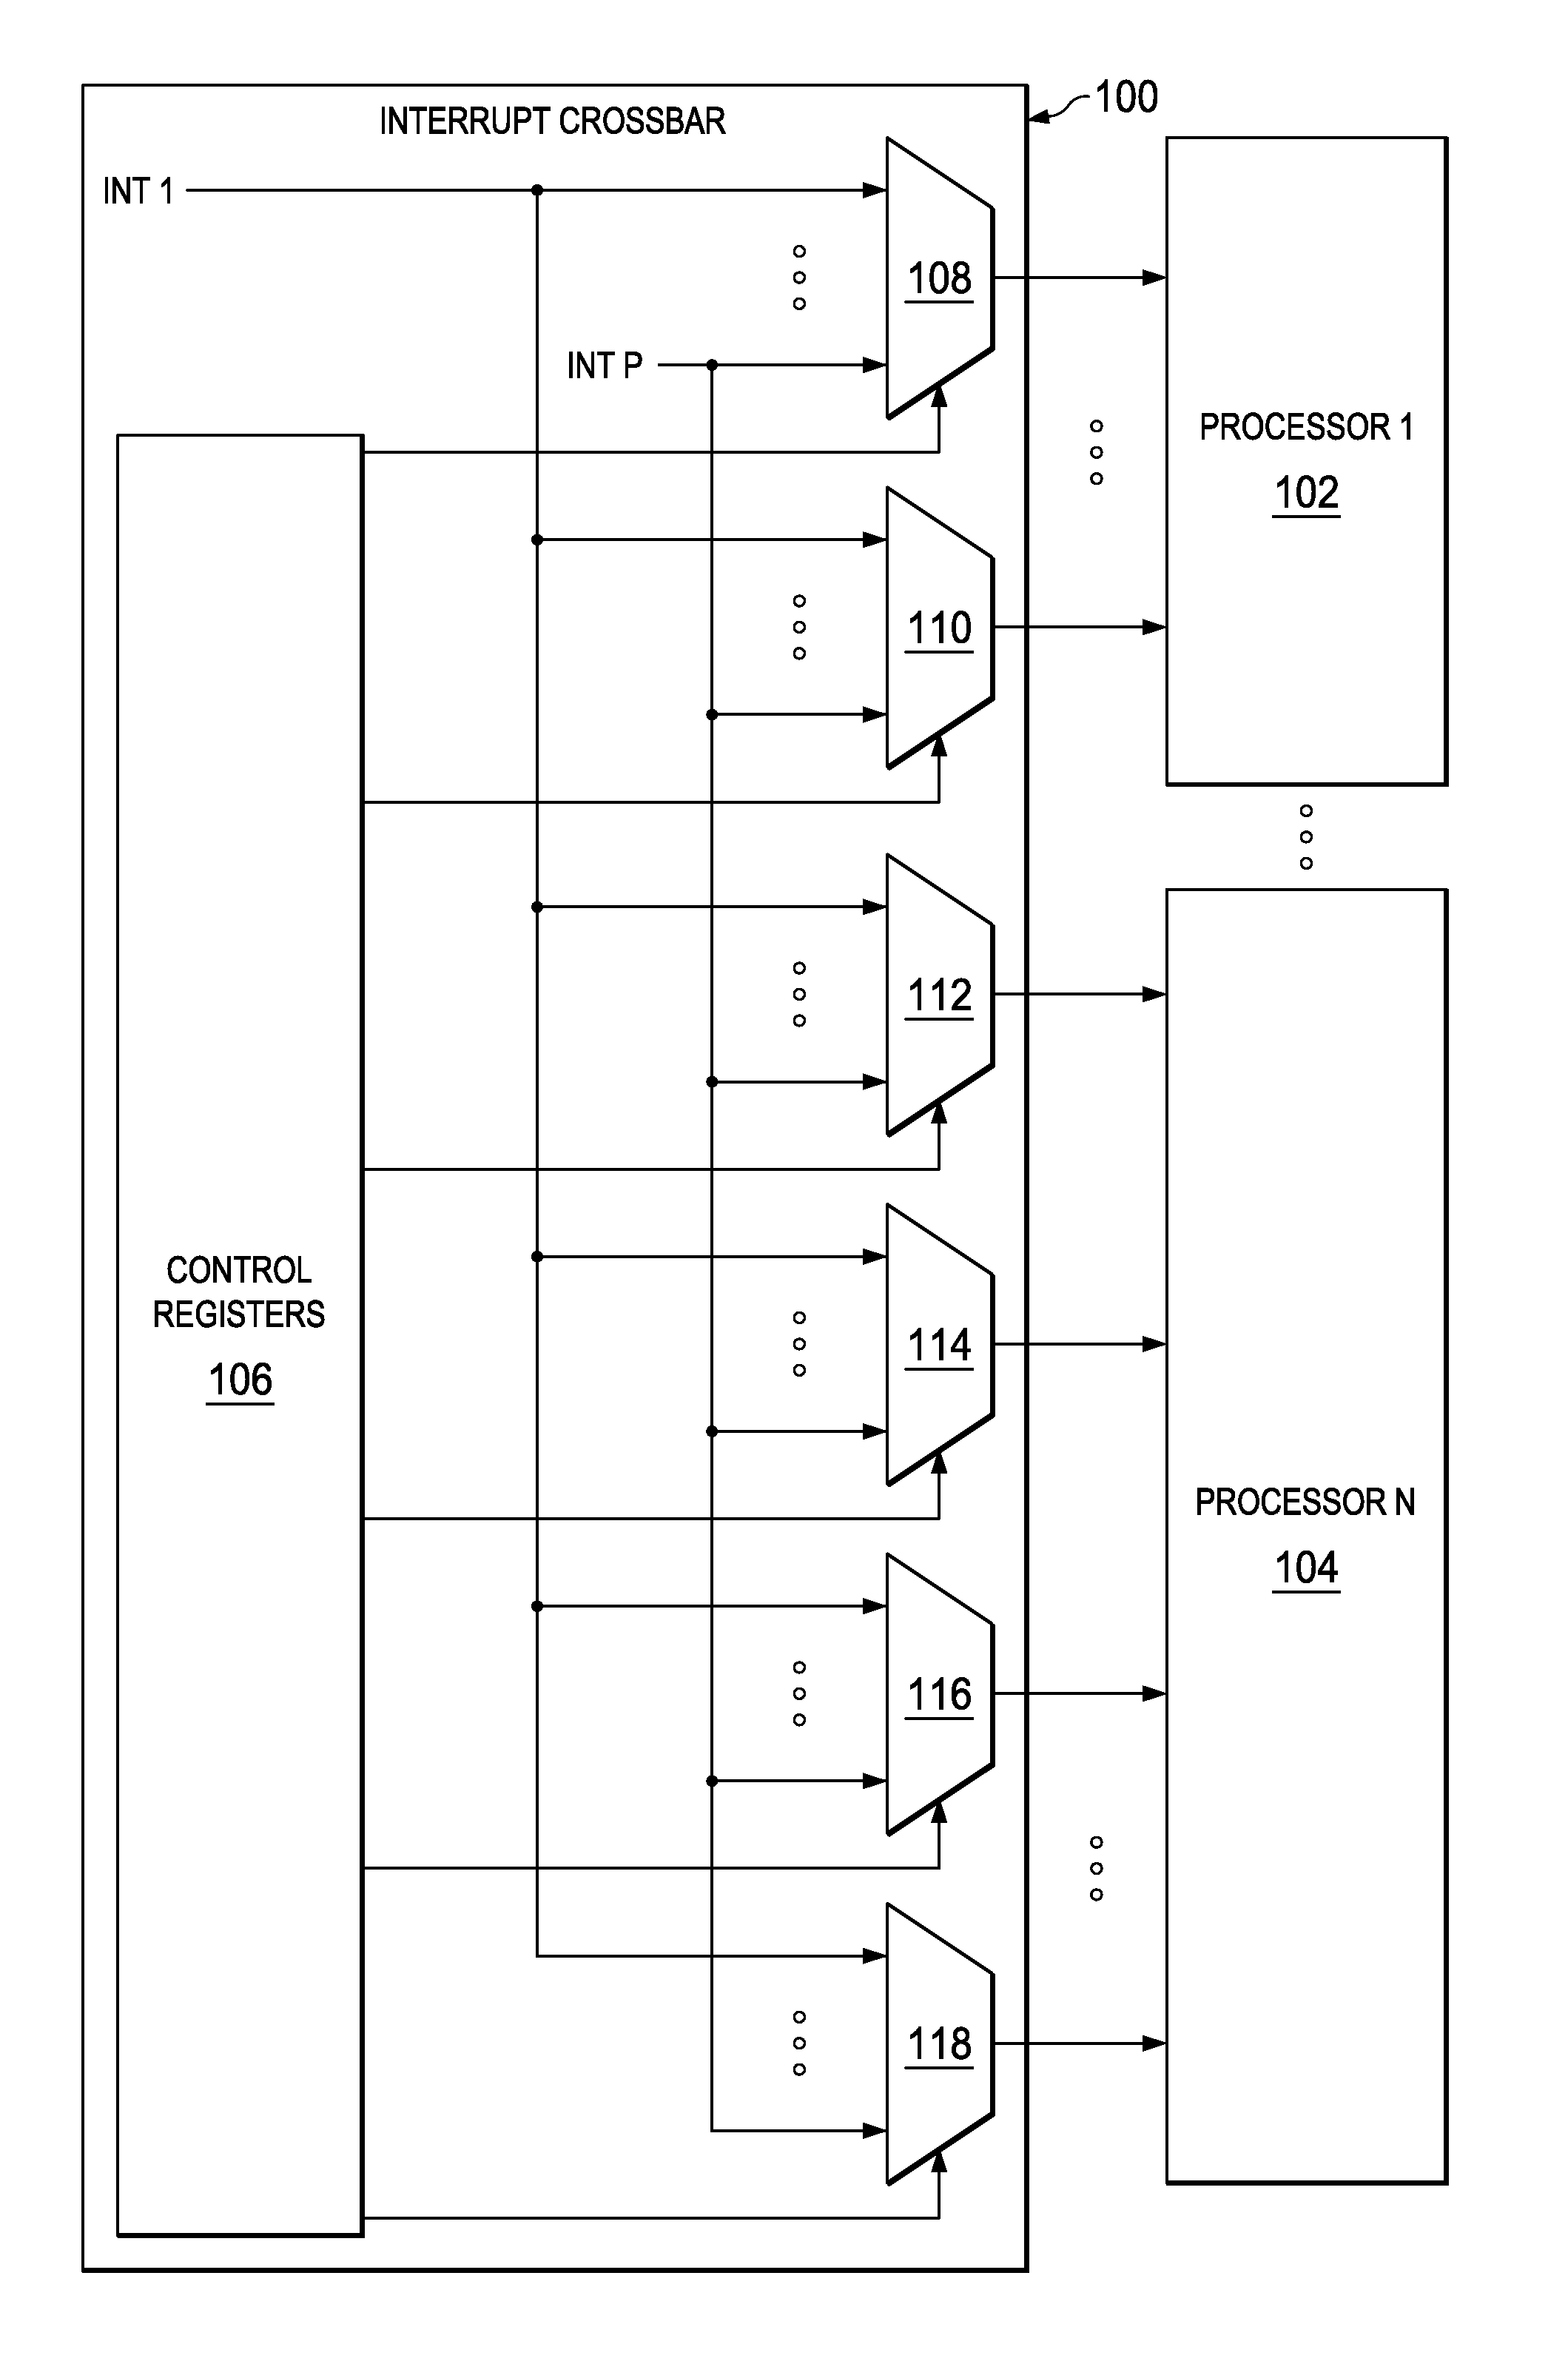 Programmable Interrupt Routing in Multiprocessor Devices